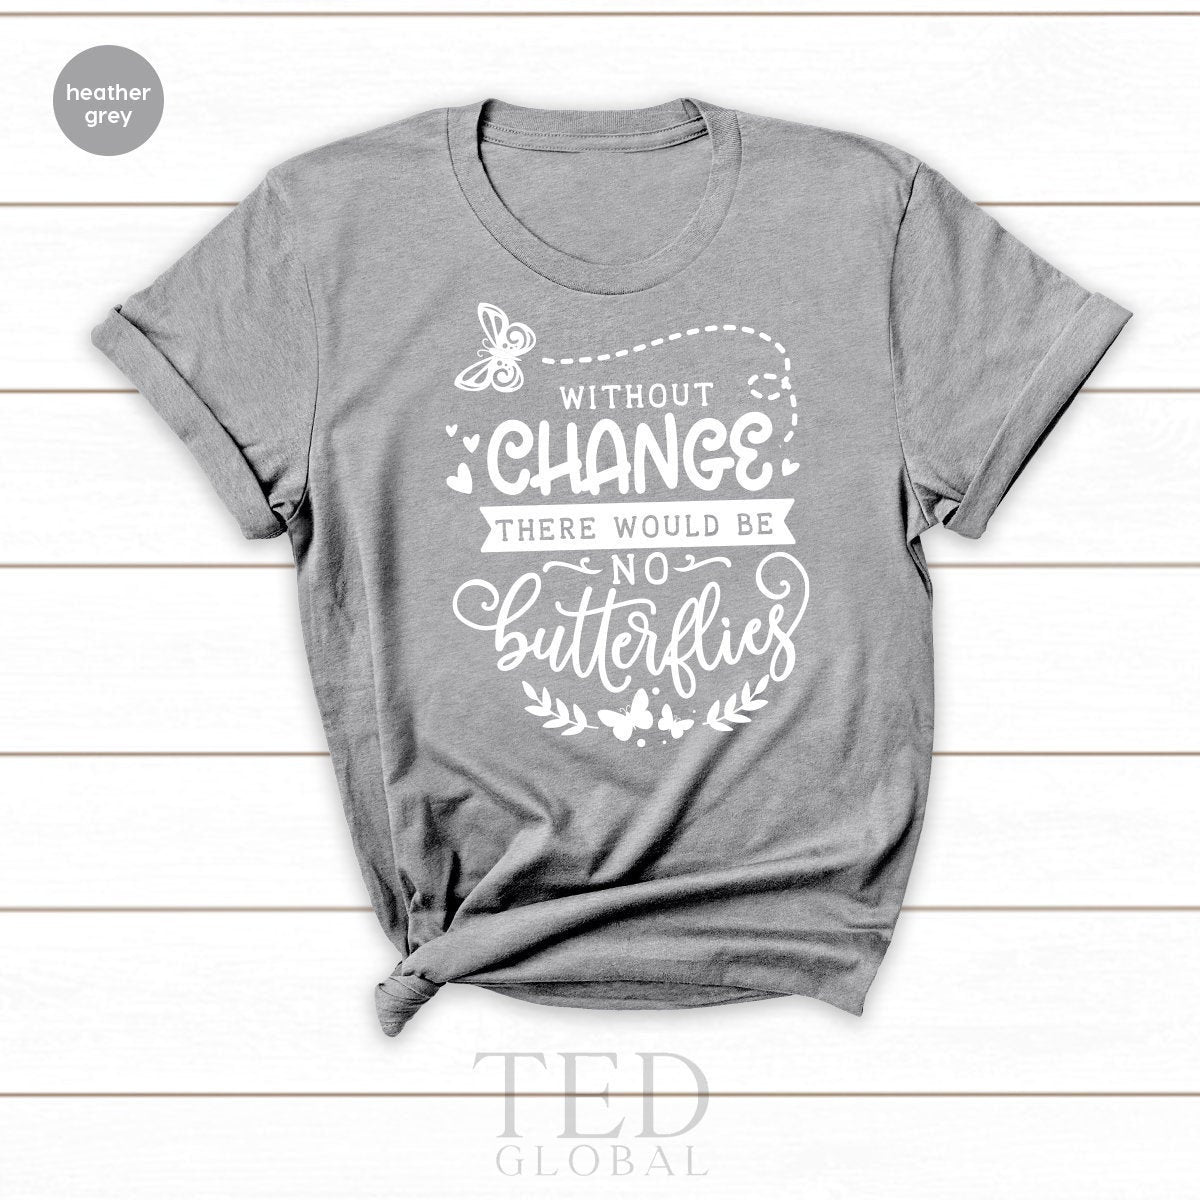 Nature Lover Shirt, Environmental Shirt, Without Change There Would Be No Butterflies Shirt, Save Butterflies Shirt, Only One Earth Shirt - Fastdeliverytees.com